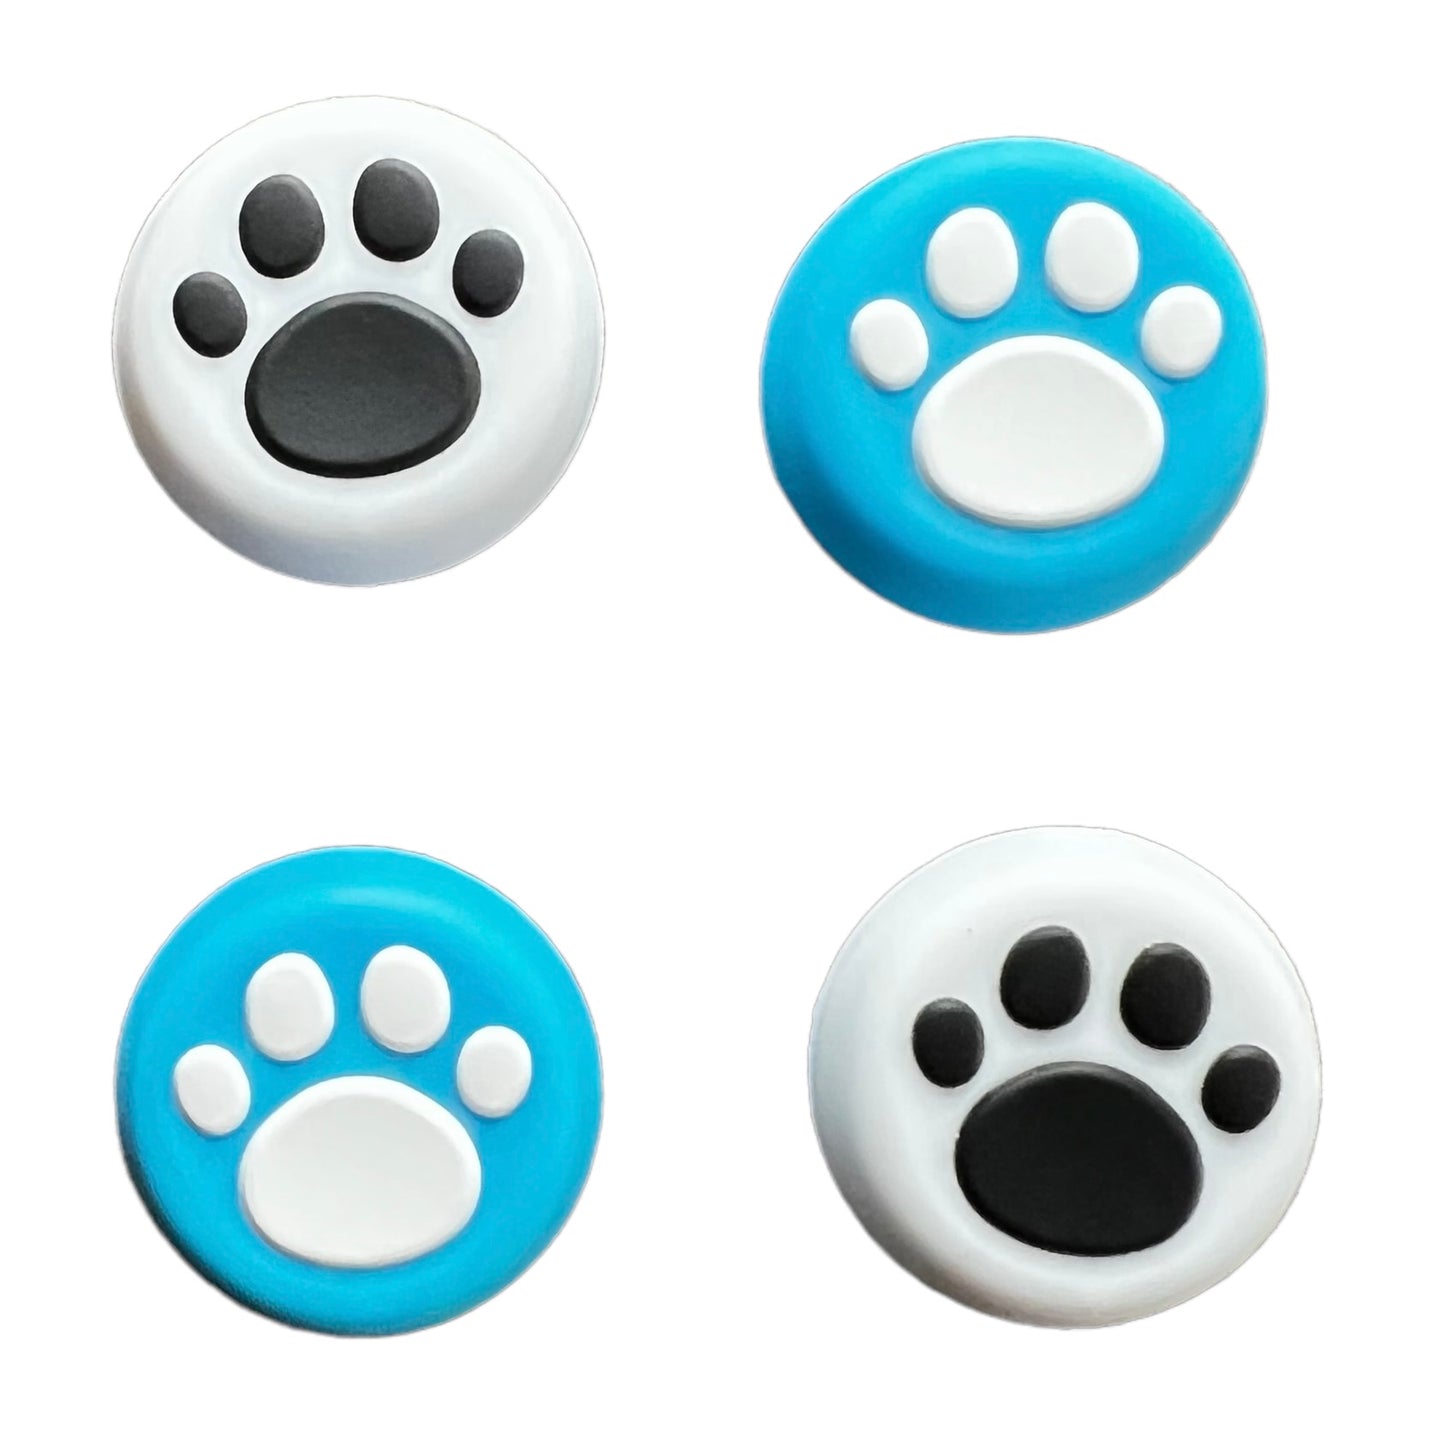 JenDore Blue White Black Paws 4Pcs Silicone Thumb Grip Caps for Nintendo Switch Pro , PS5 , PS4 , and Xbox 360 Controller